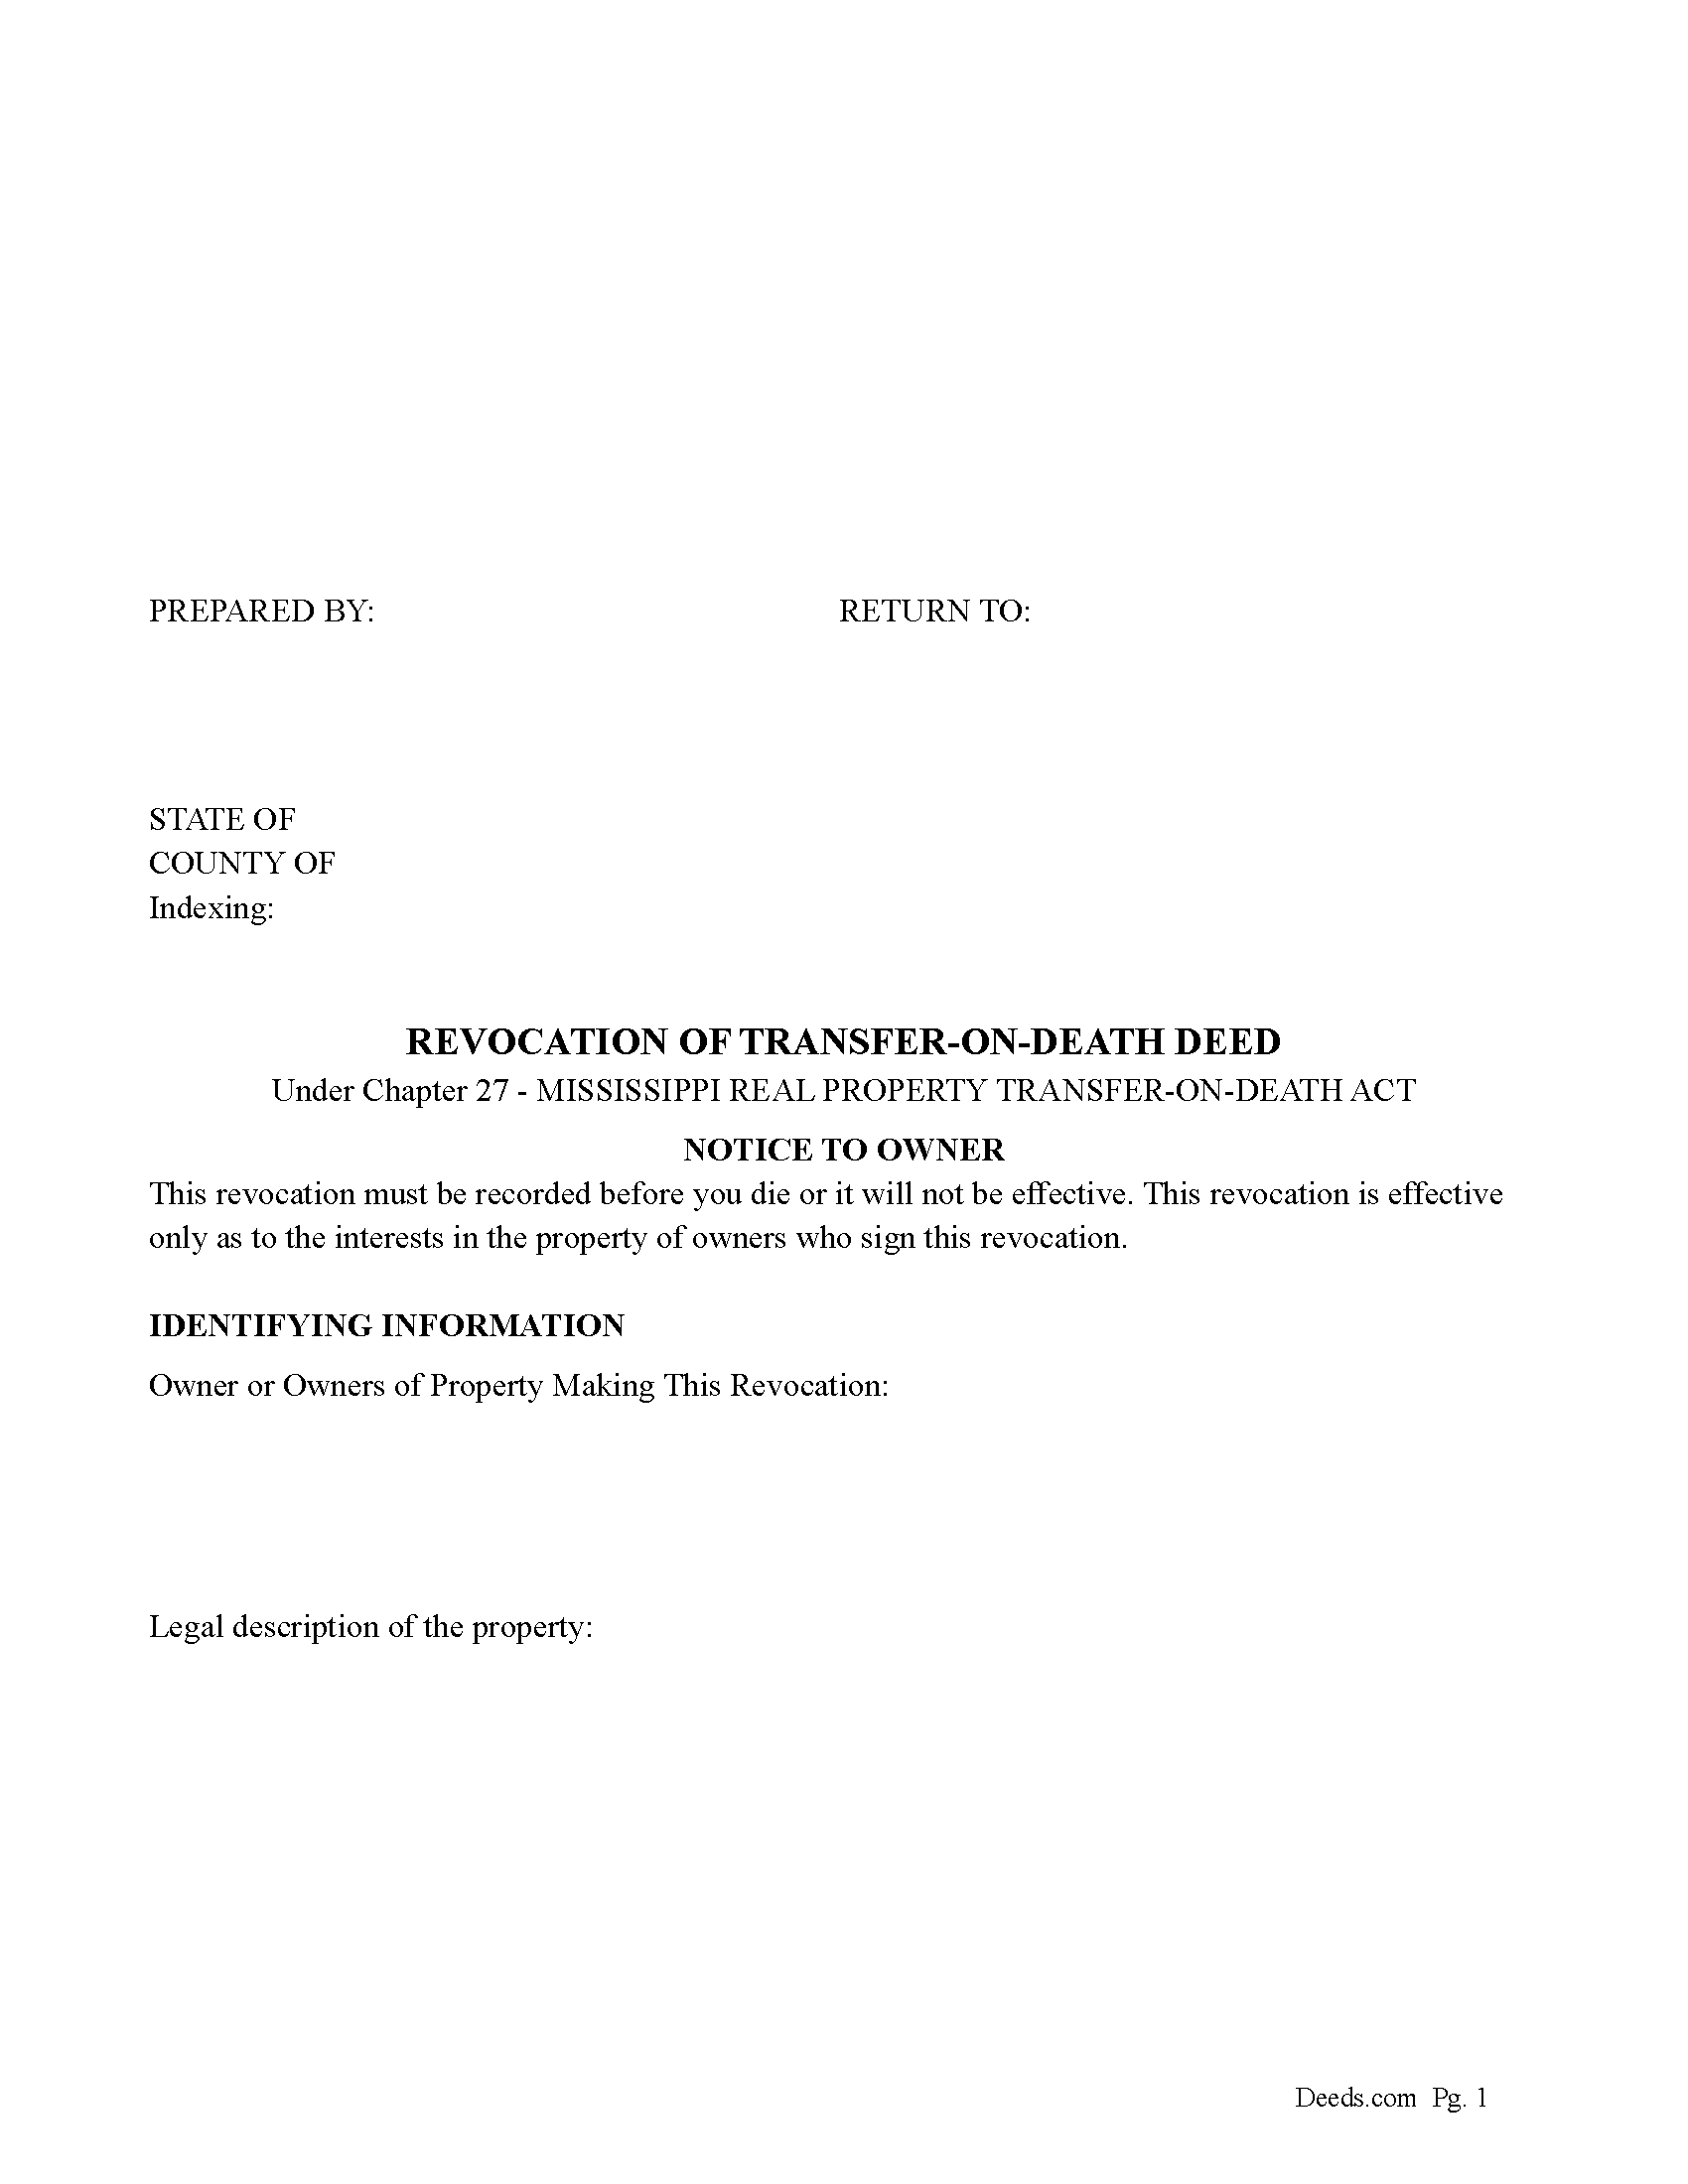 Mississippi Revocation of Transfer on Death Deed Image